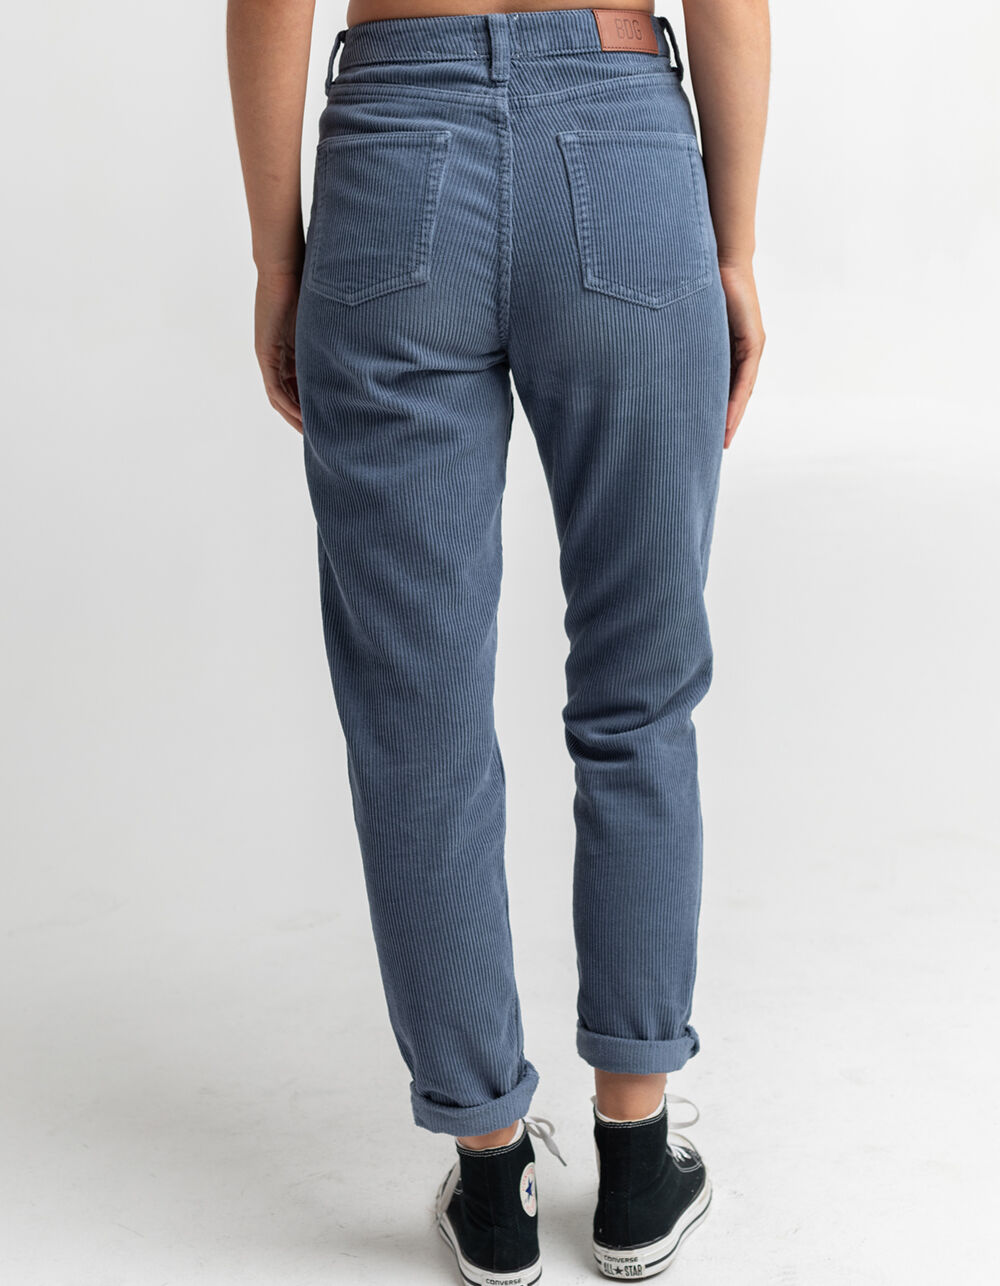 BDG Urban Outfitters Corduroy Mom Pants - BLUE | Tillys